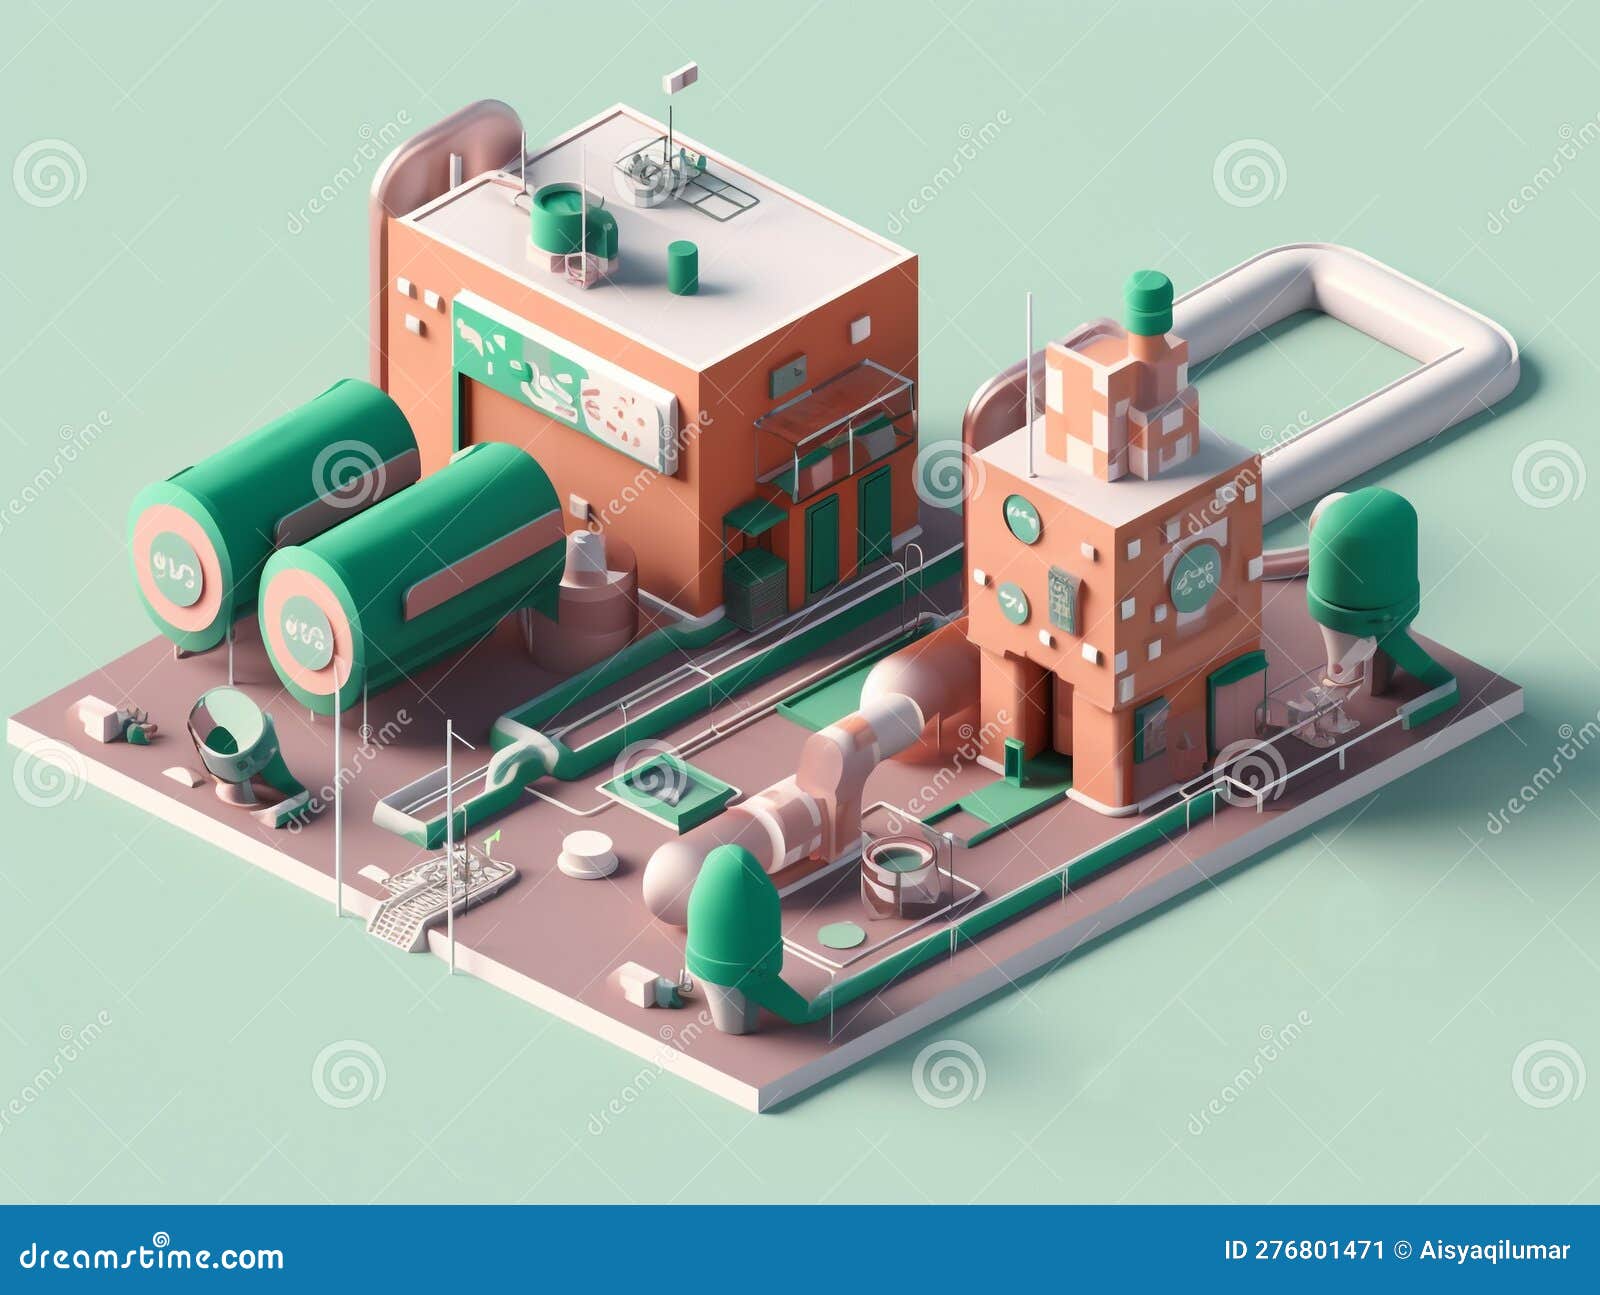 Isometric View of the Exterior of a Factory Building with Exposed ...